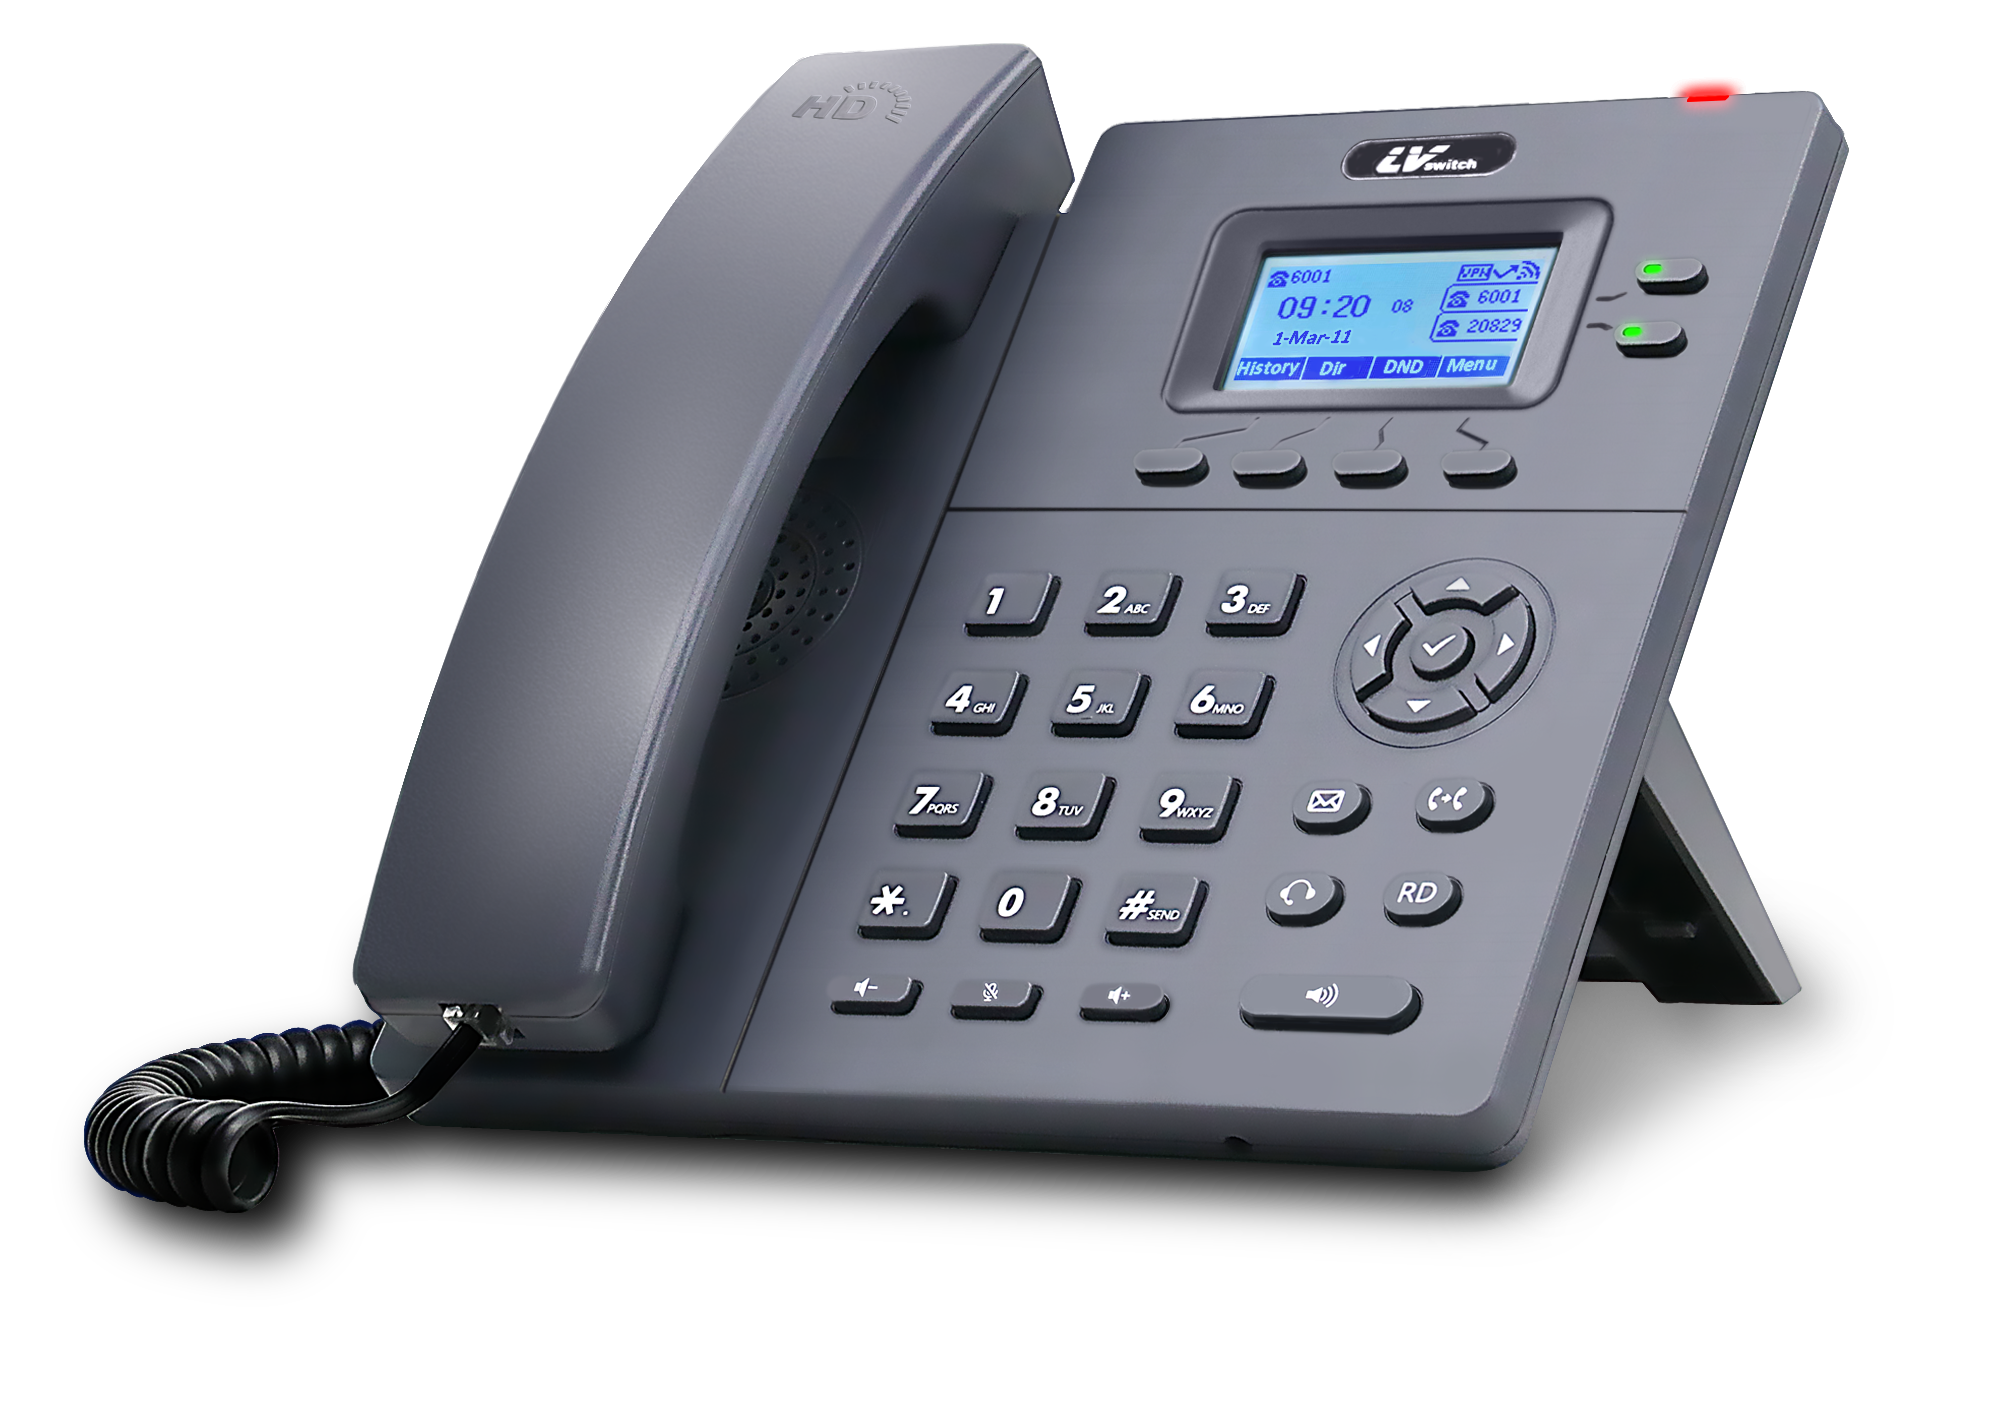 IP Phone SIP-T780N support WiFi link and is compatible with mainstream IP and PBX